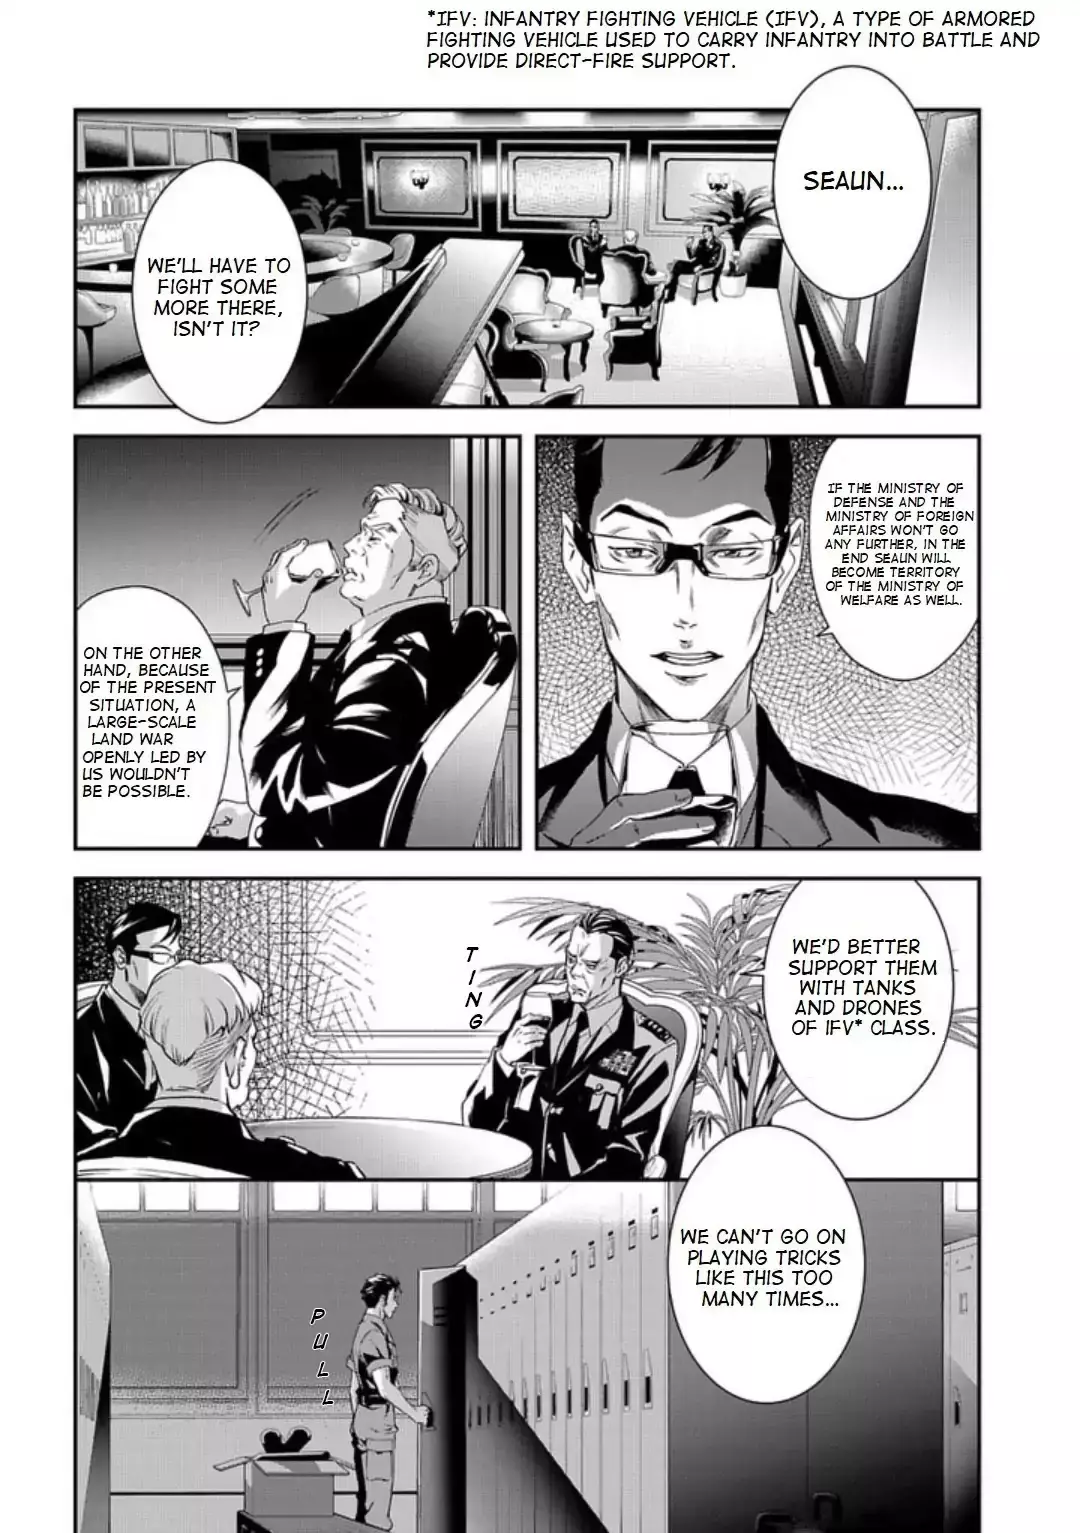 Psycho-Pass: Sinners Of The System Case 2 - First Guardian - 2 page 16-b297b7d1